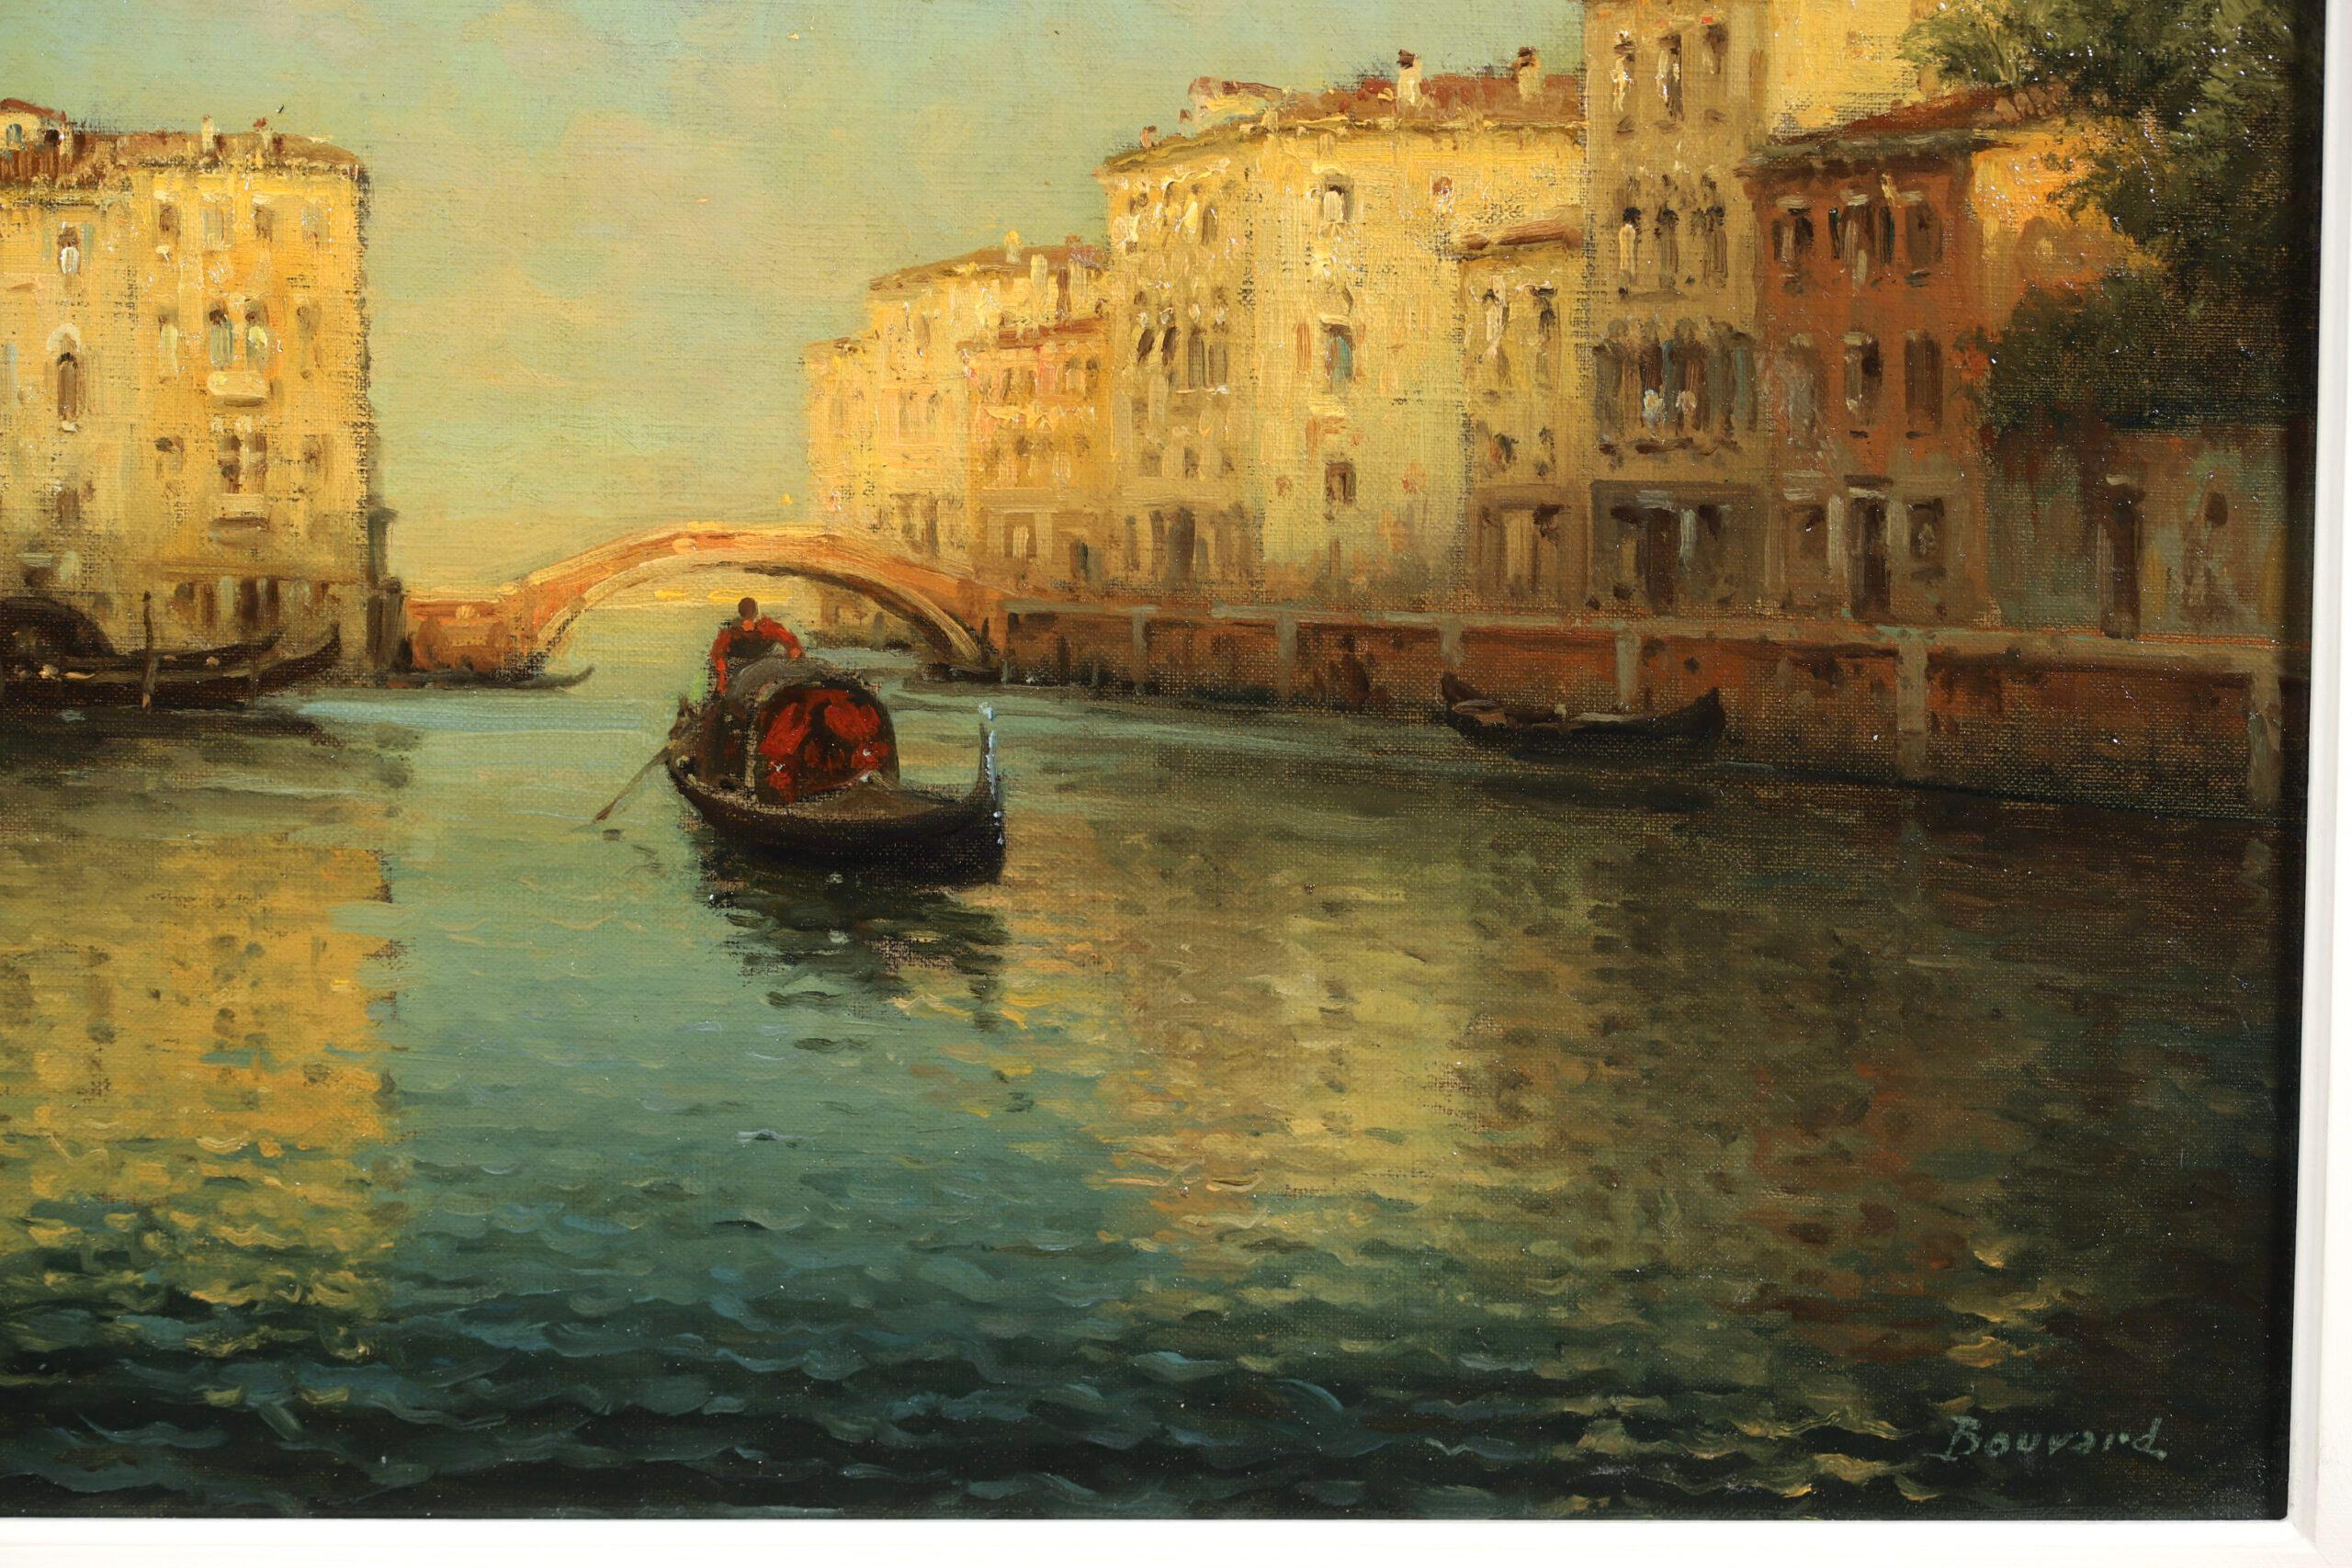 Signed impressionist landscape oil on canvas circa 1930 by French painter Antoine Bouvard Snr. The work depicts a gondolier sailing a gondola on a Venetian Canal. The last light of the setting sun is illuminating the painted walls of the buildings